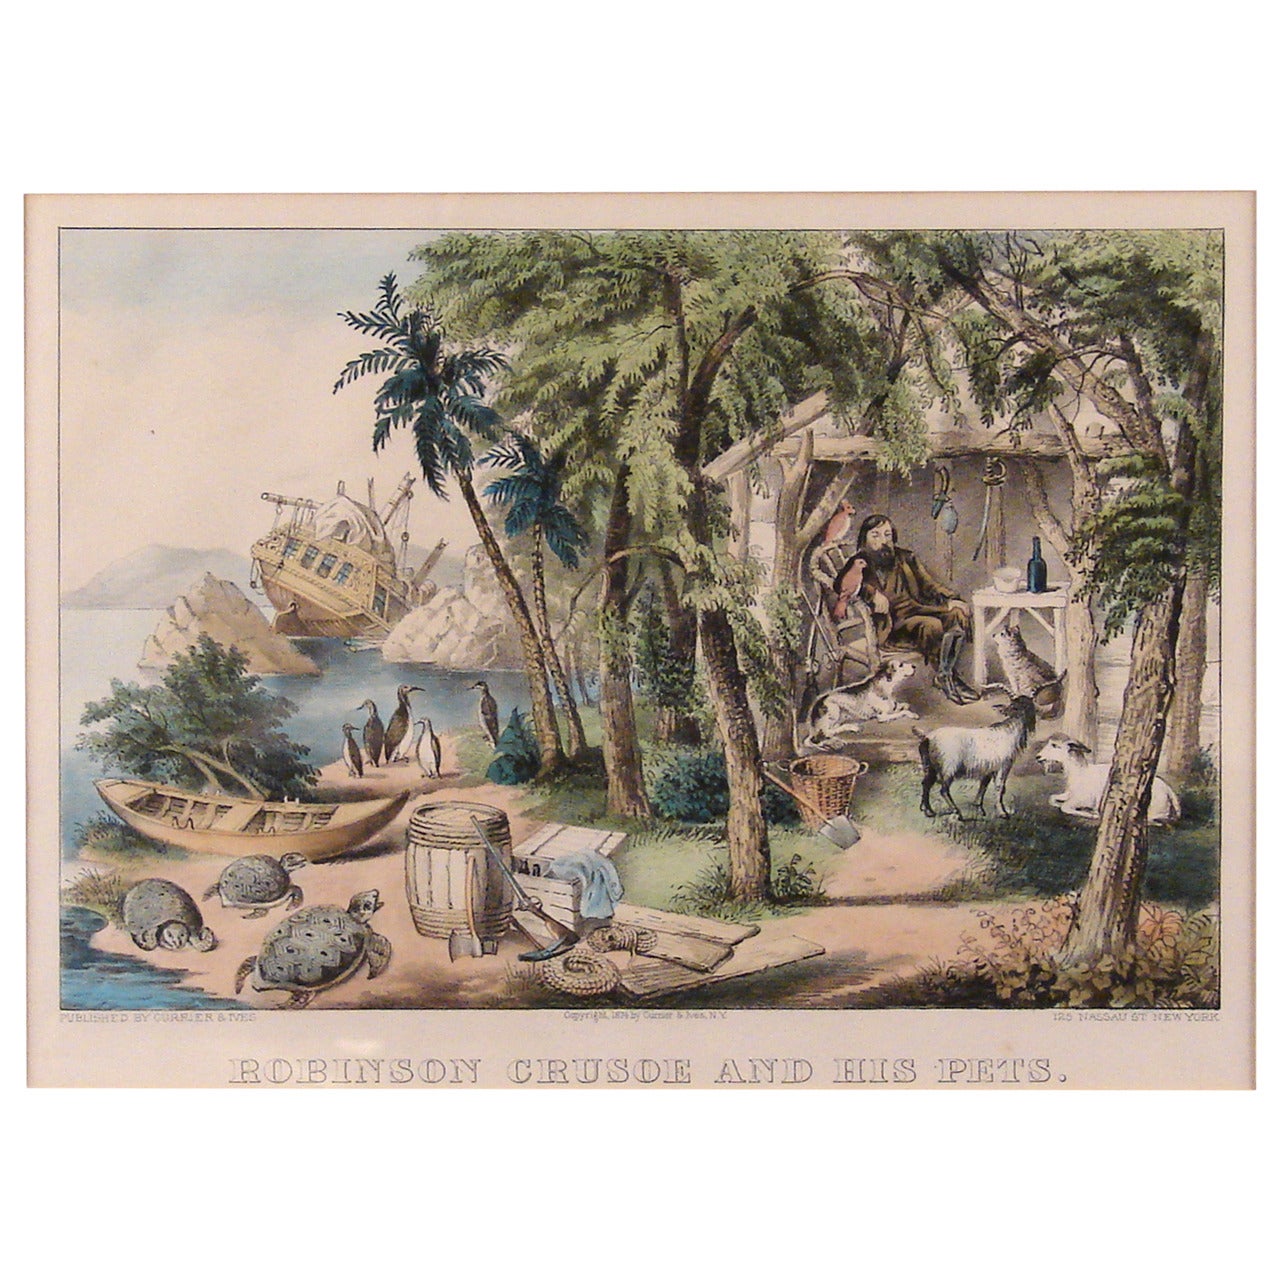 Amusing Currier and Ives Print, "Robinson Crusoe and His Pets"